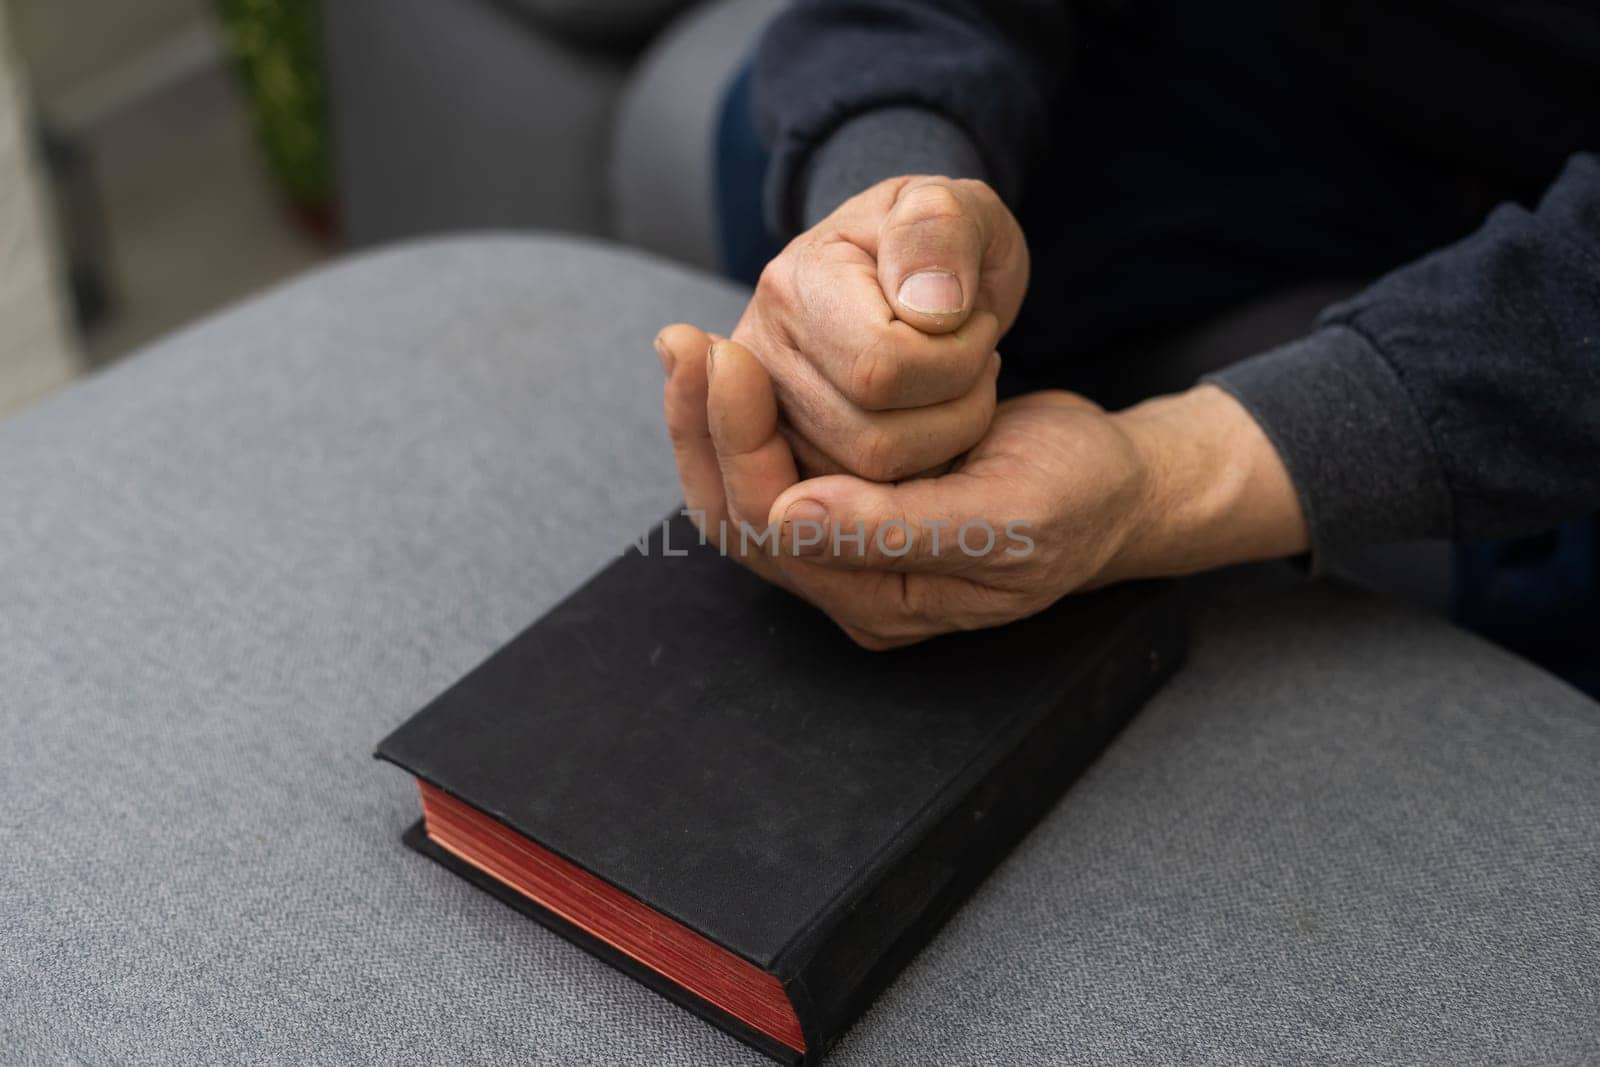 Hands of man praying to god with the bible, Concept of faith for god by Andelov13